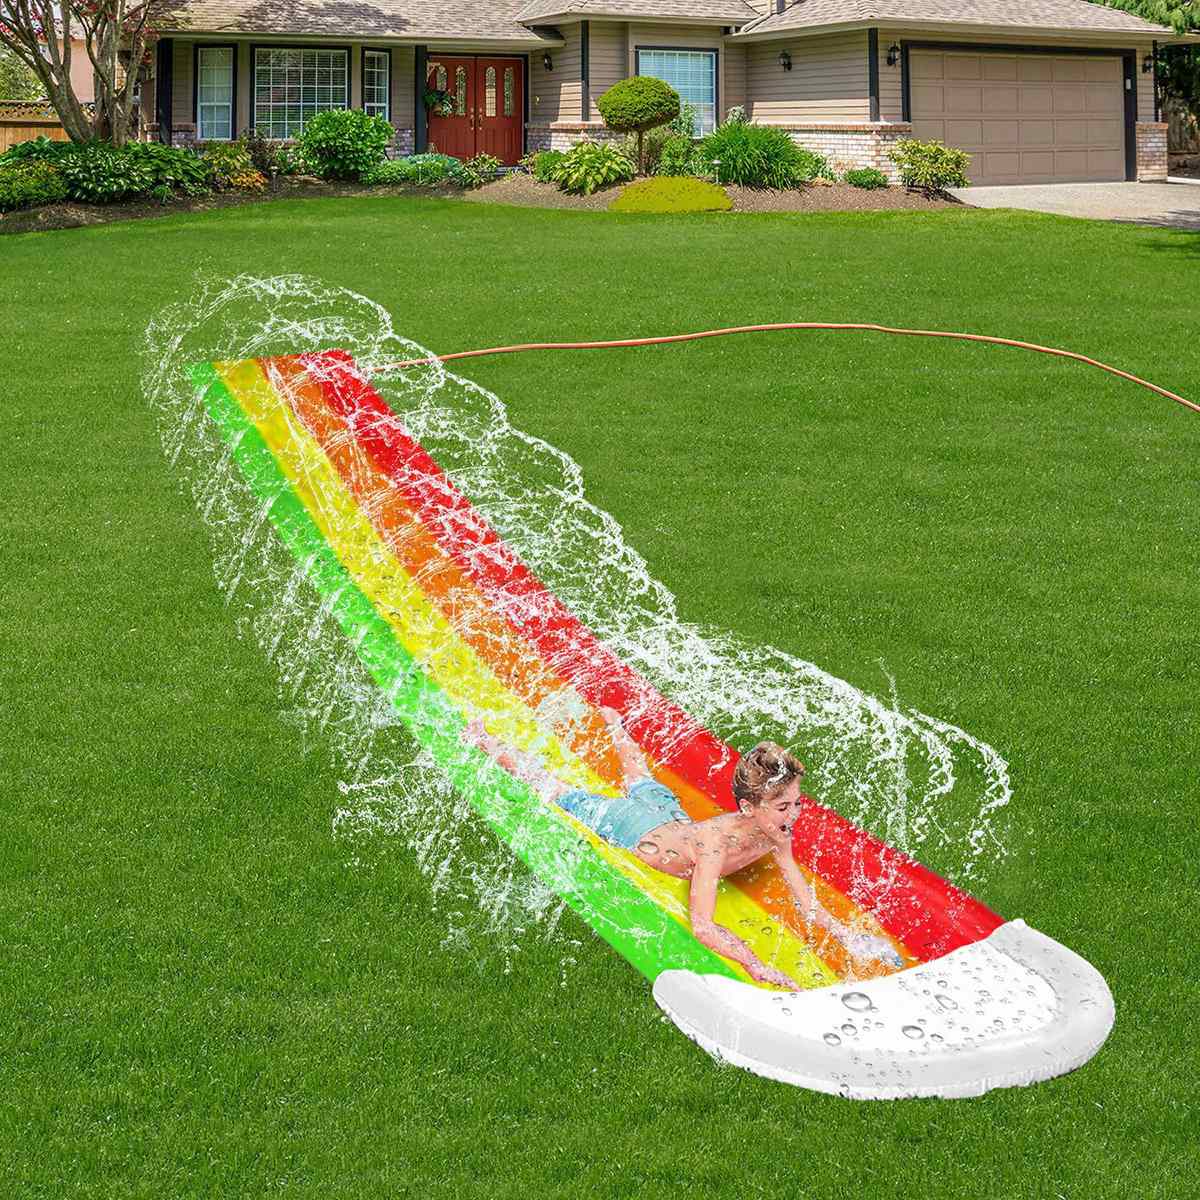 NEW Giant Surf Water Slide Fun Lawn Water Slides Pools For Kids Summer PVC Games Center Backyard Outdoor Children Adult Toys